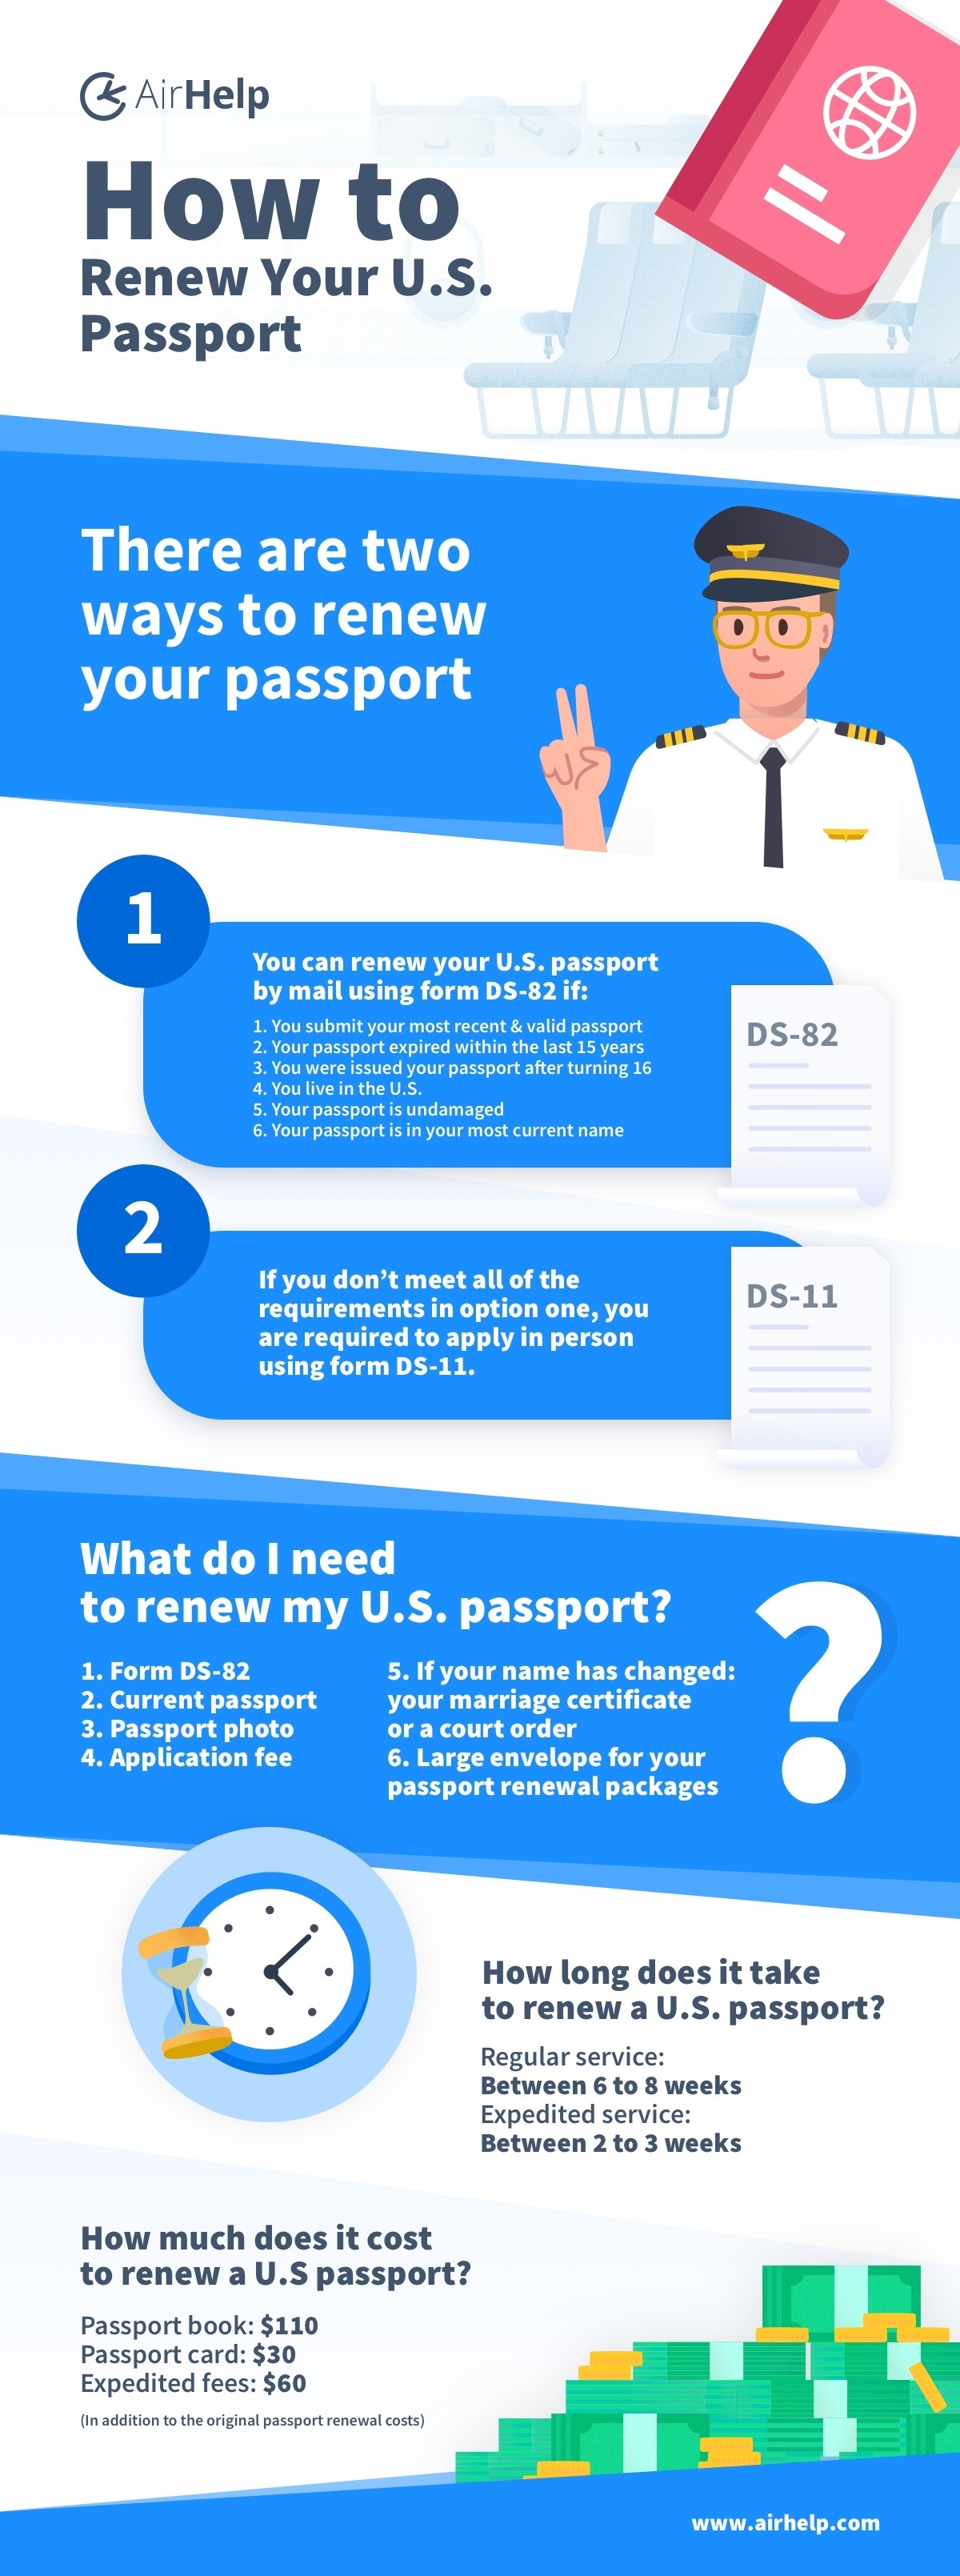 what do you need to renew your passport